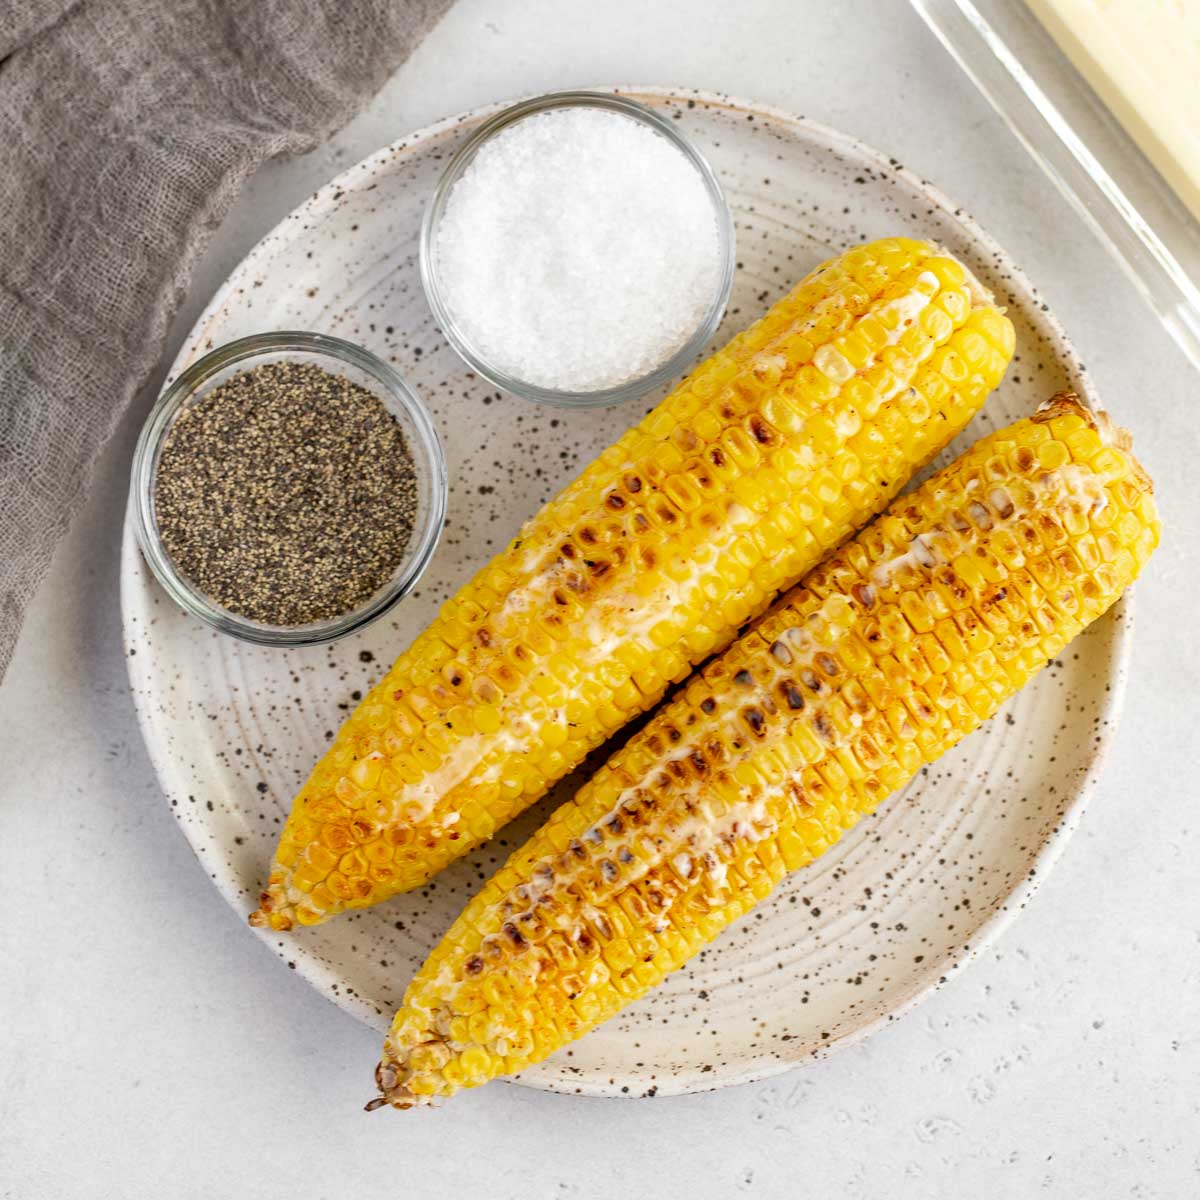 A speckled plate holding two pieces of corn on the cob with salt and pepper beside them.